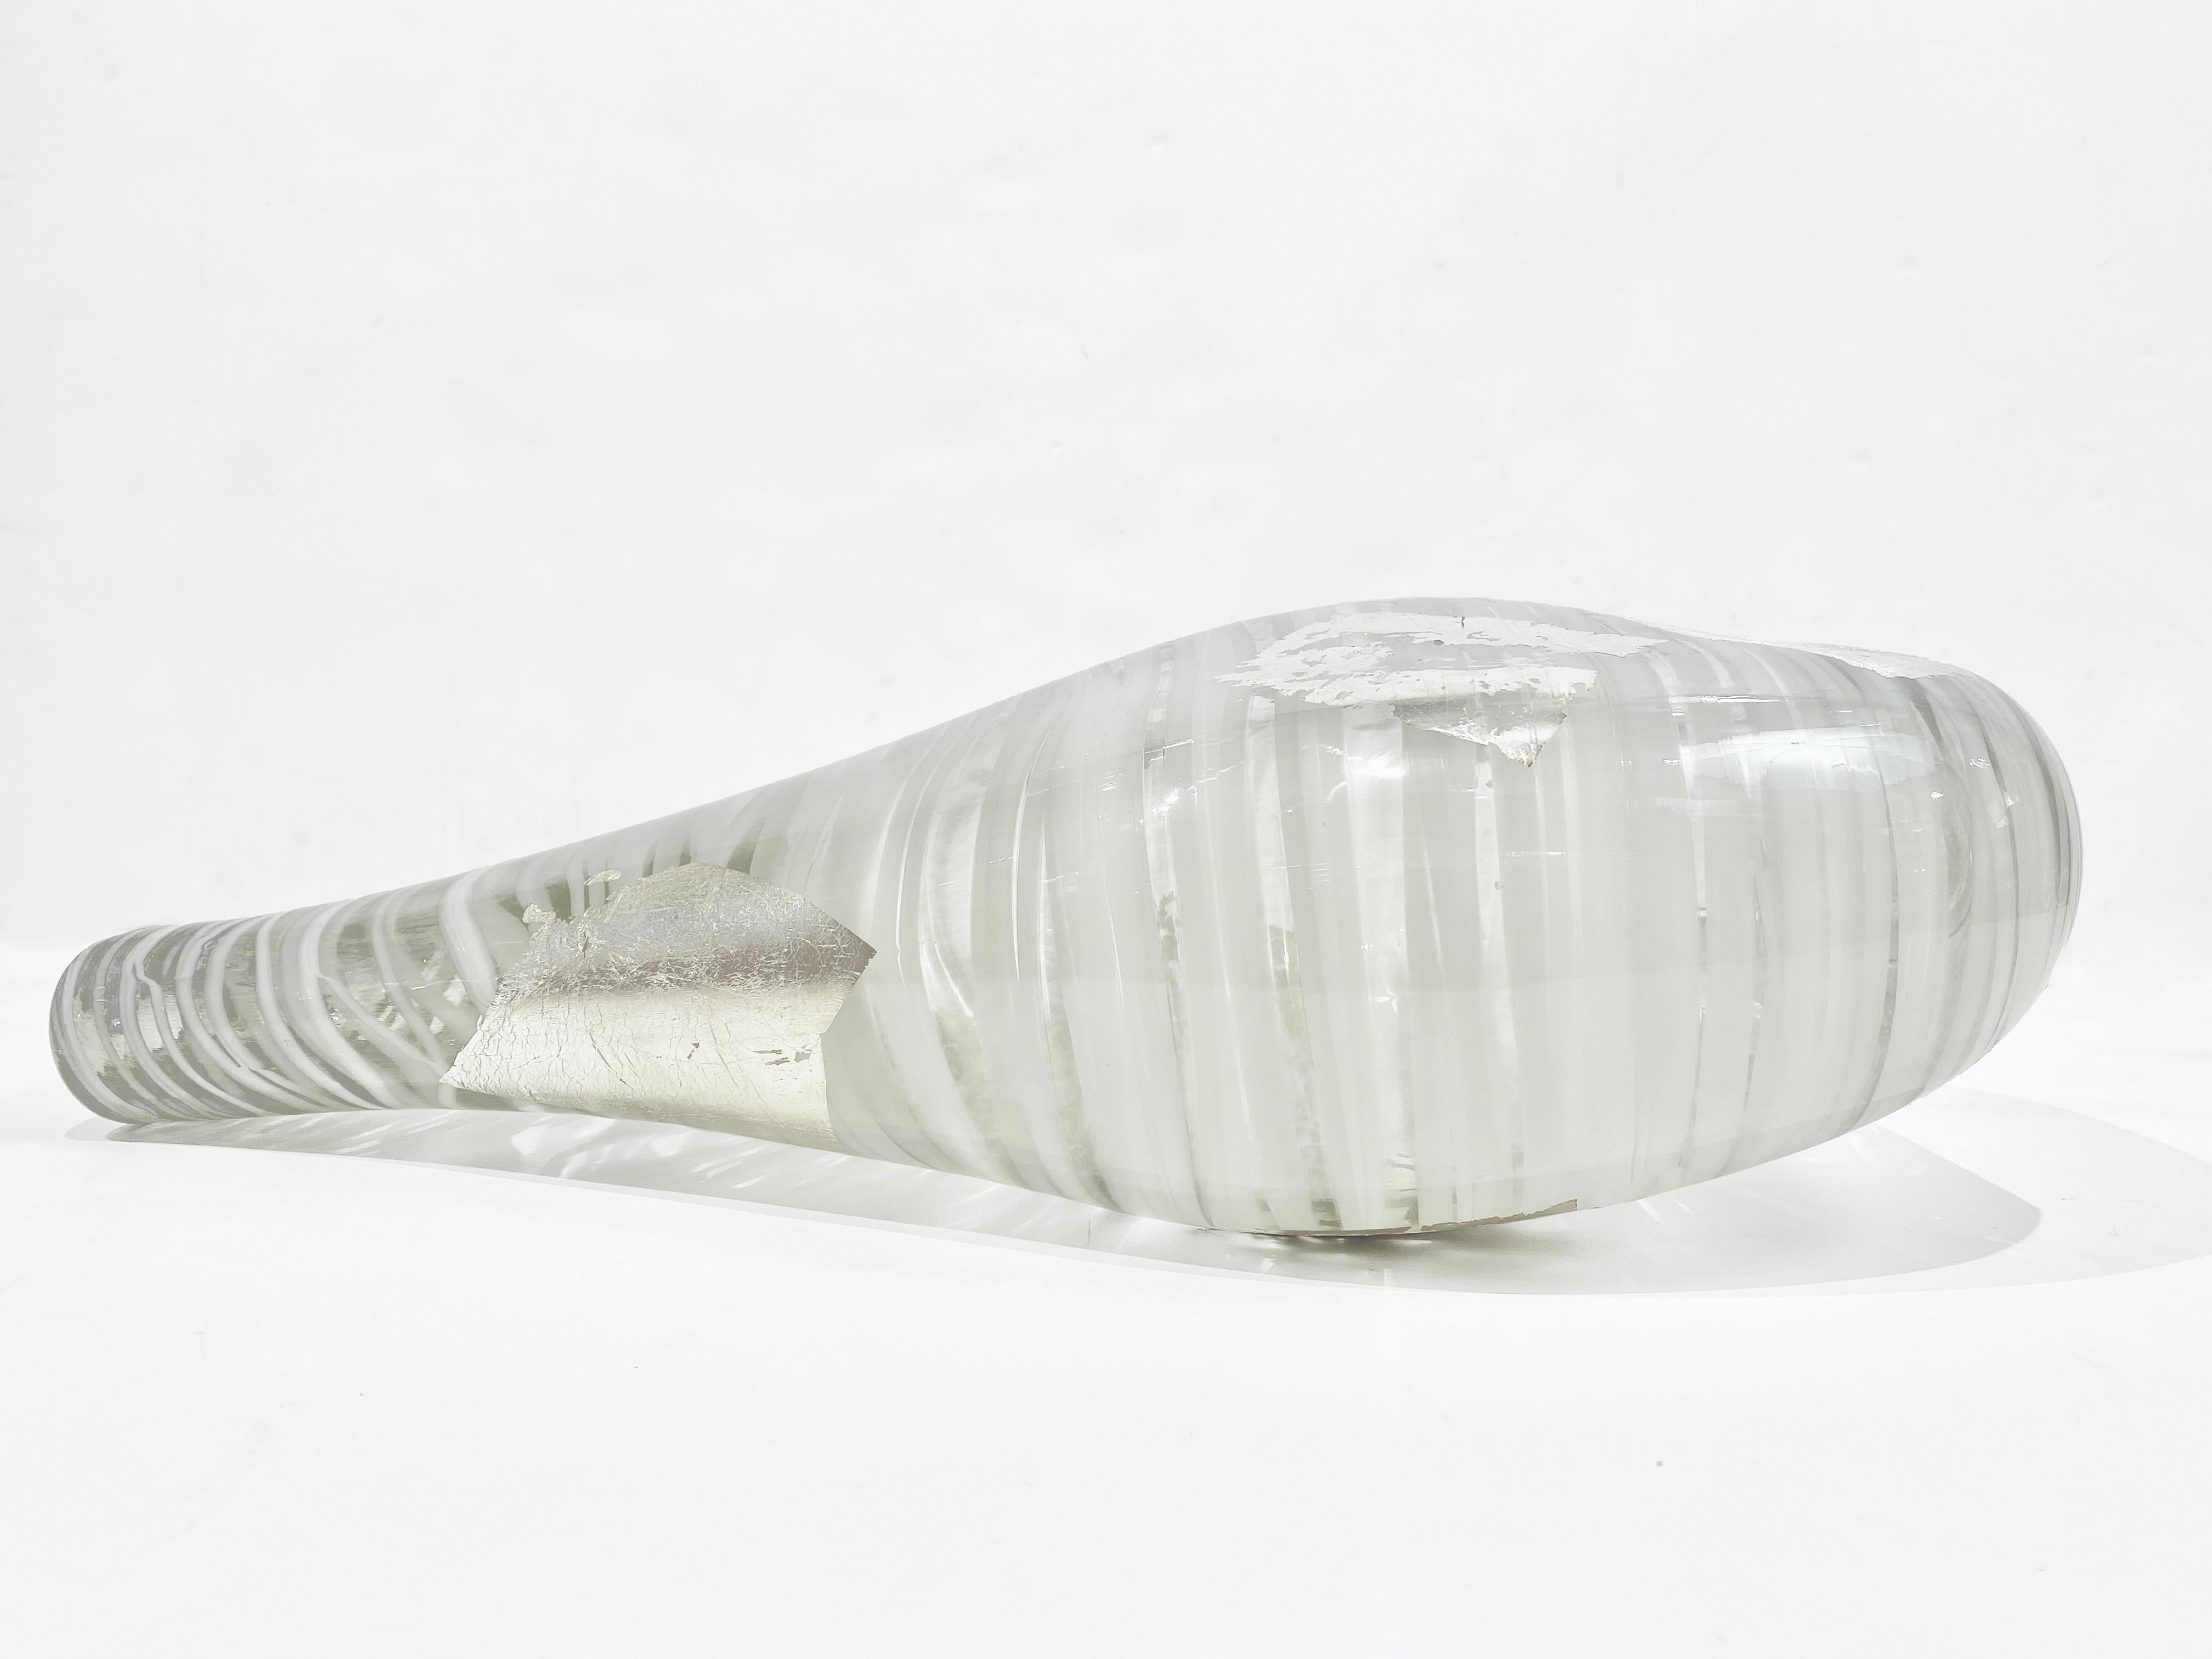 Italian Art Deco Style Silver Leaf White Clear Murano Glass Sculpture Vase For Sale 7